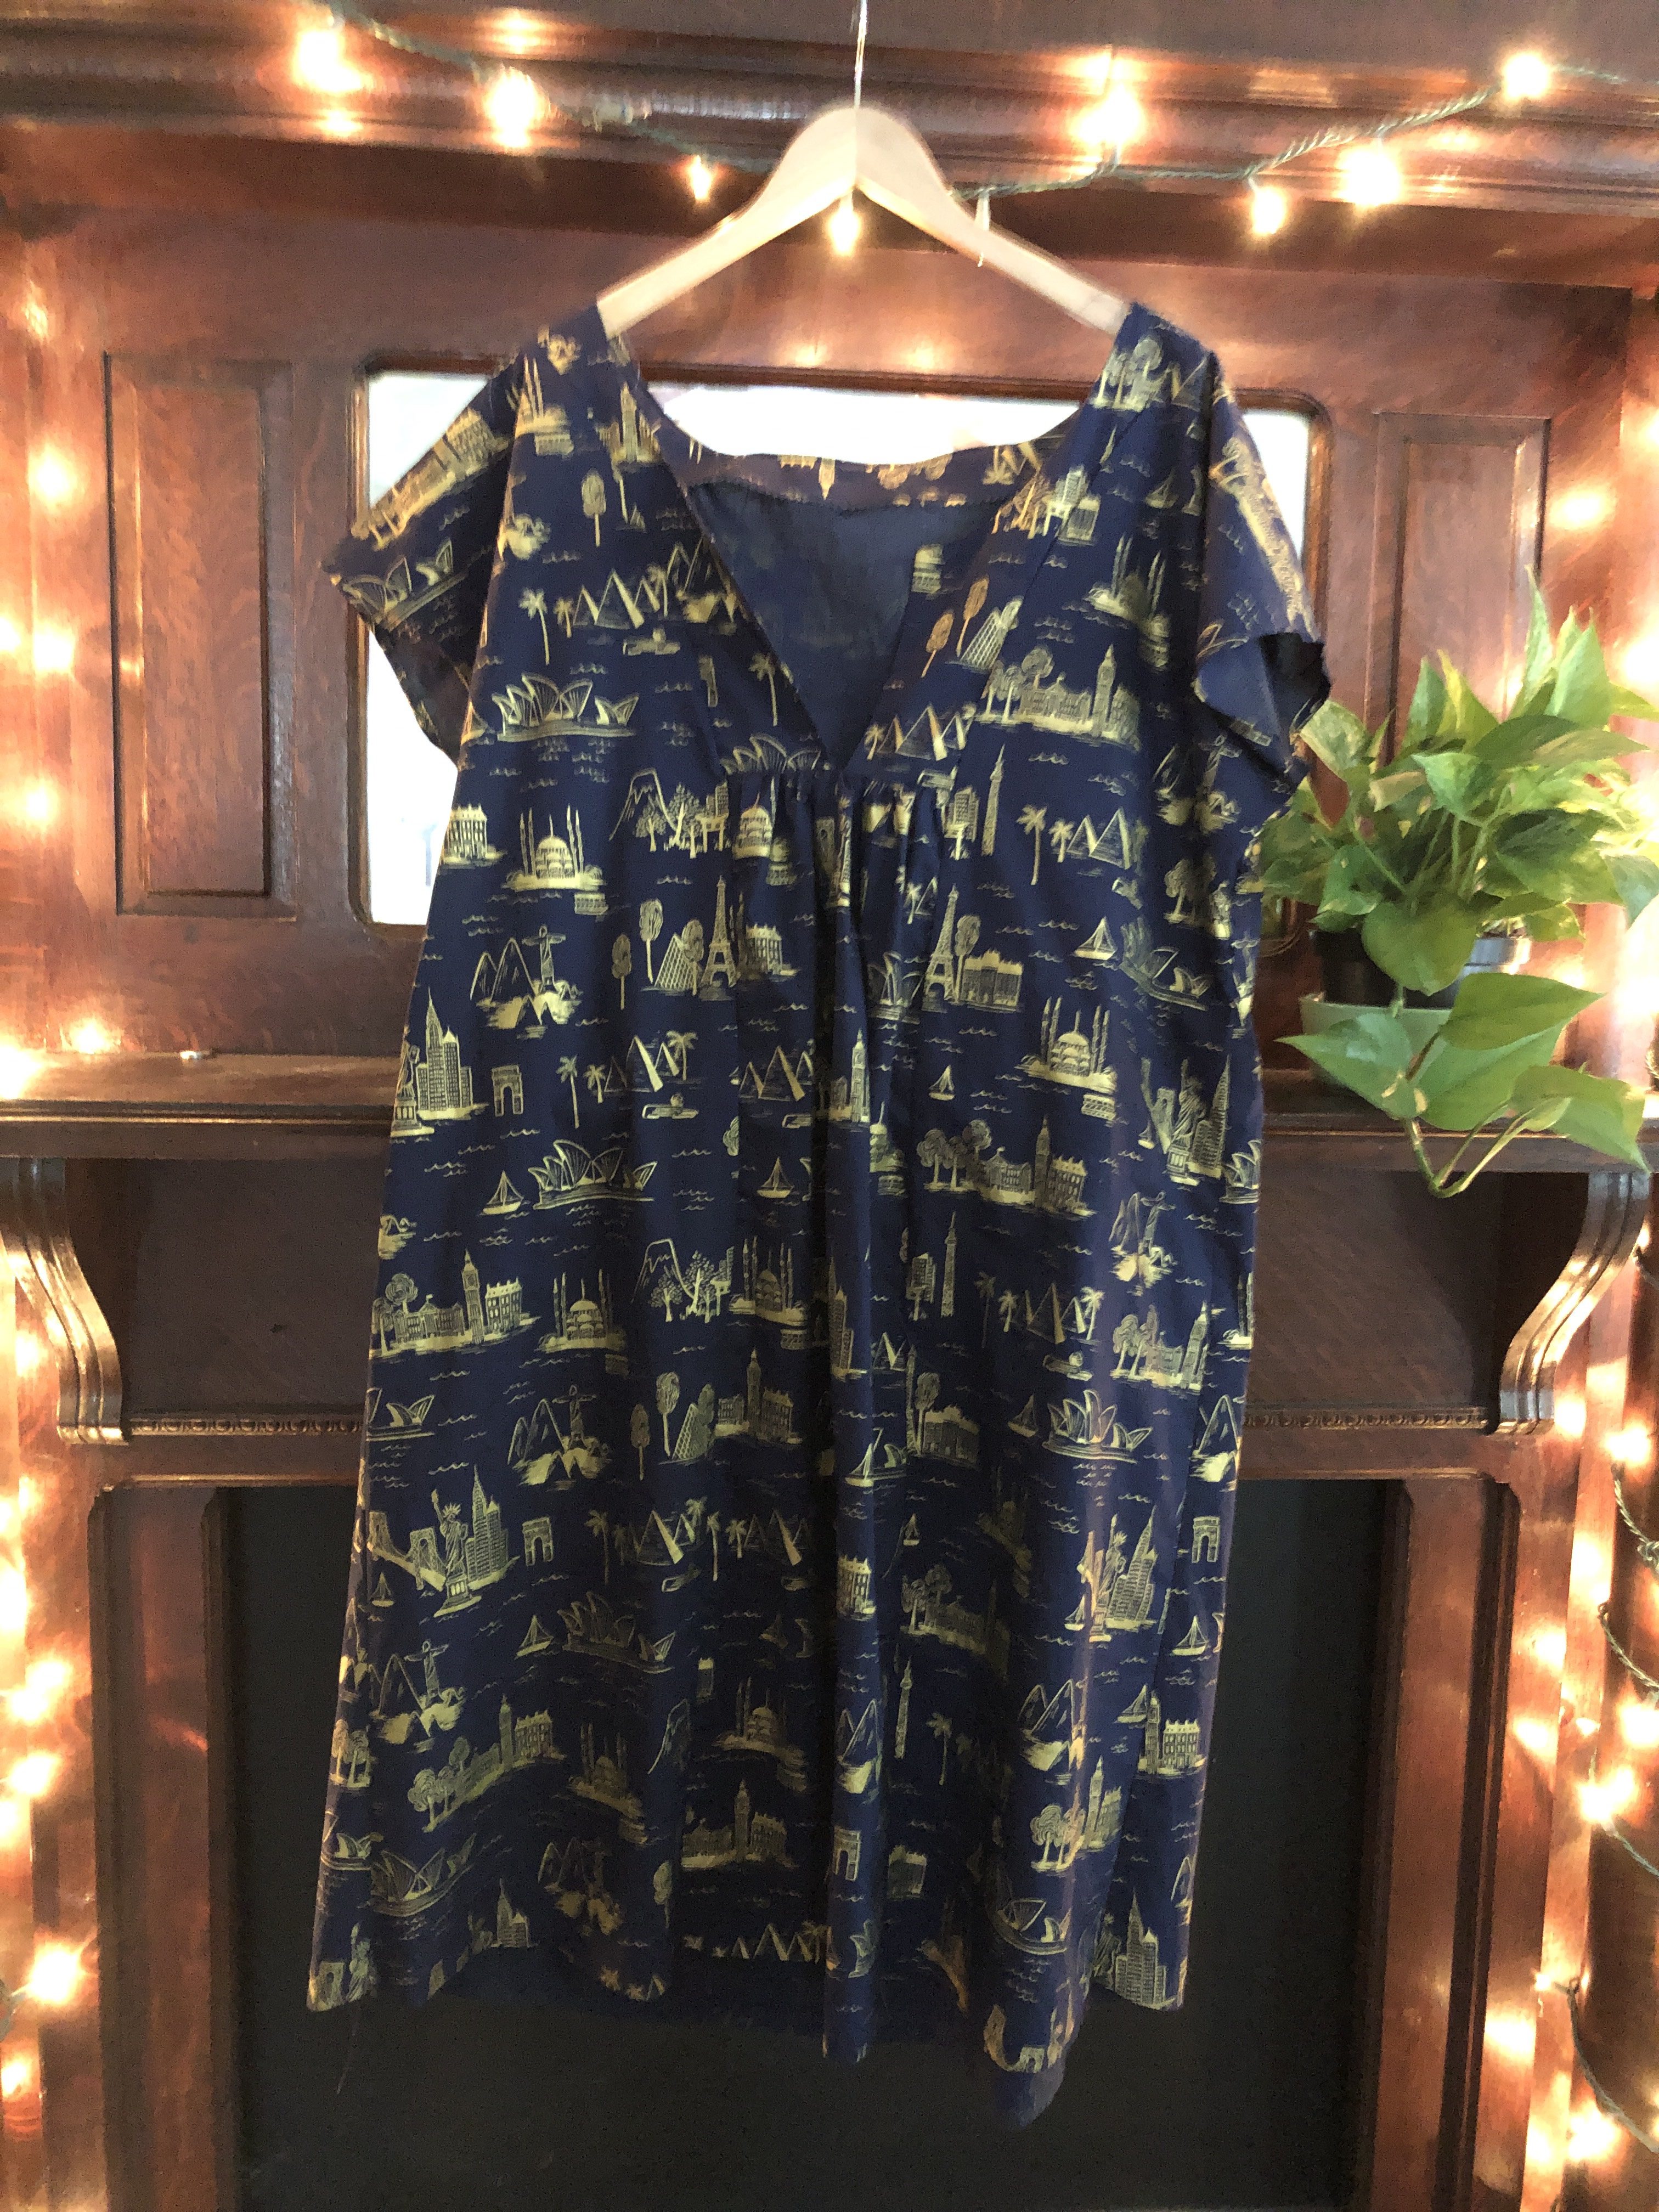 Photo of a Mojave dress from Seamwork. The fabric is dark blue with gold silhouettes of landmarks printed on it.